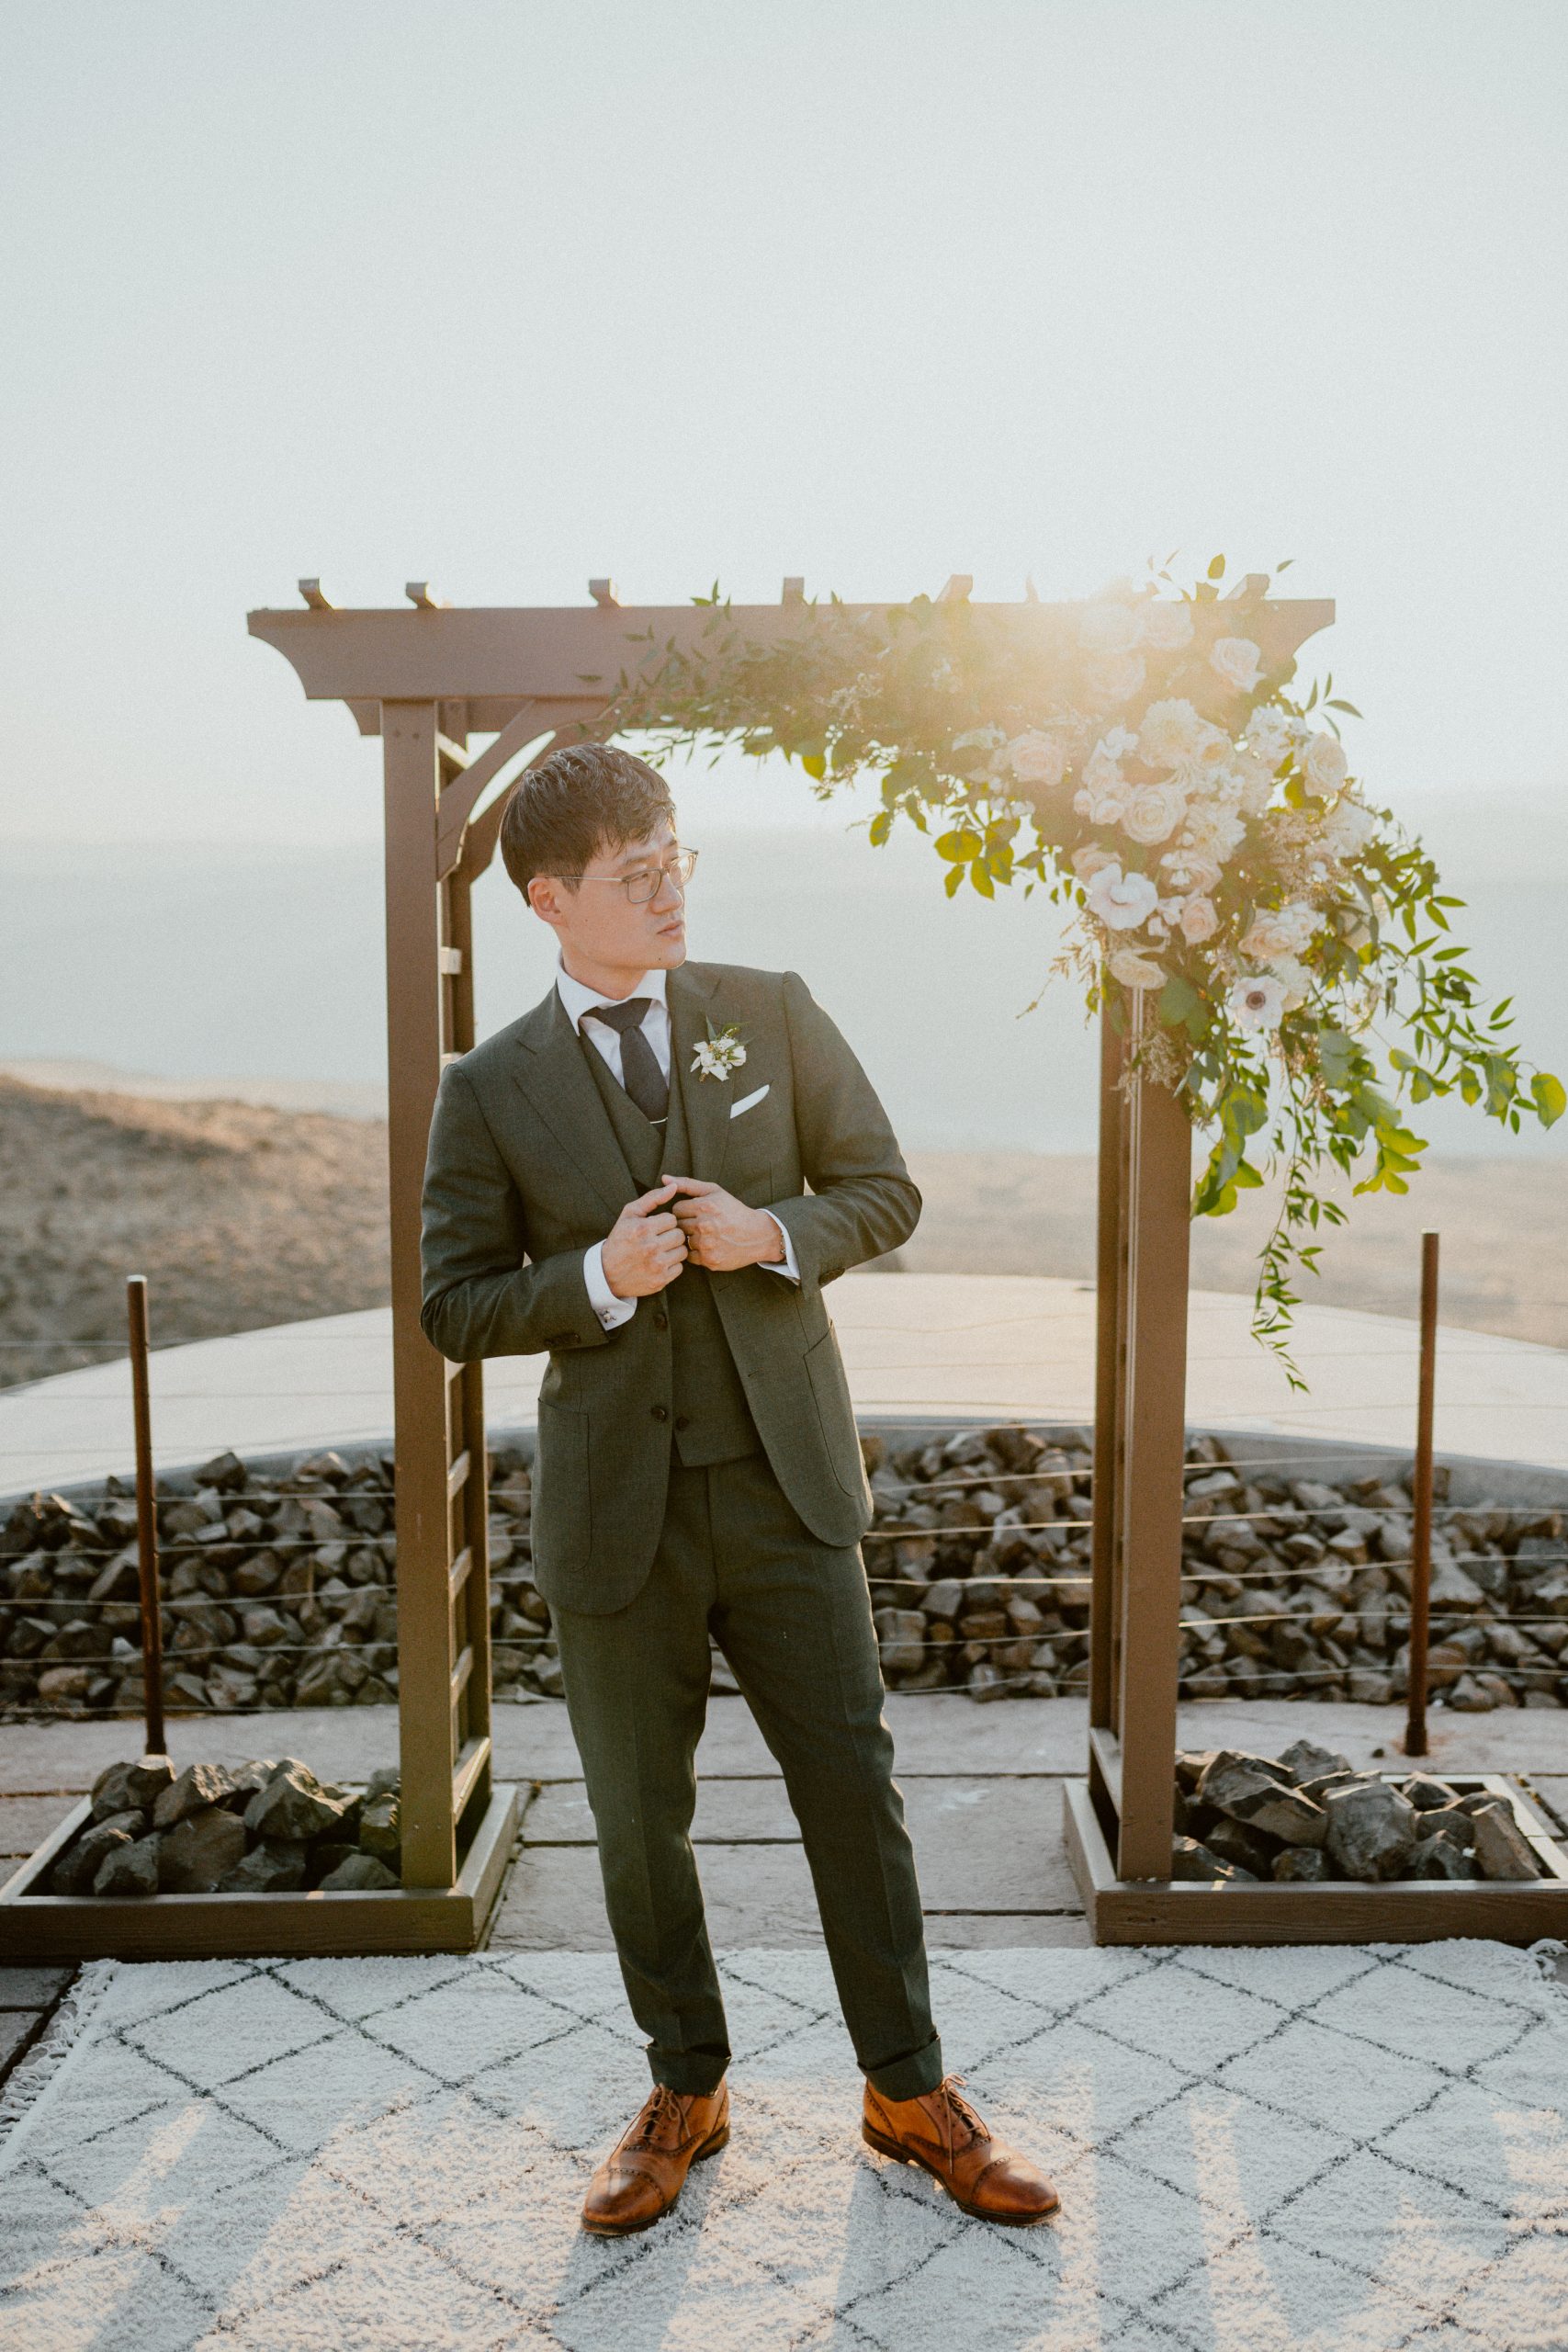 Wedding day groom style photography of grey suit and brown dress shoes, style inspiration for grooms | Washington Elopement, Destination Elopement Photographer, Cave B Inn Elopement Inspiration, Washington Elopement ideas, PNW Fall Wedding Inspiration, Fall Outdoor Wedding Ideas,Fall Wedding Inspiration, PNW Outdoor Wedding Ideas | chelseaabril.com